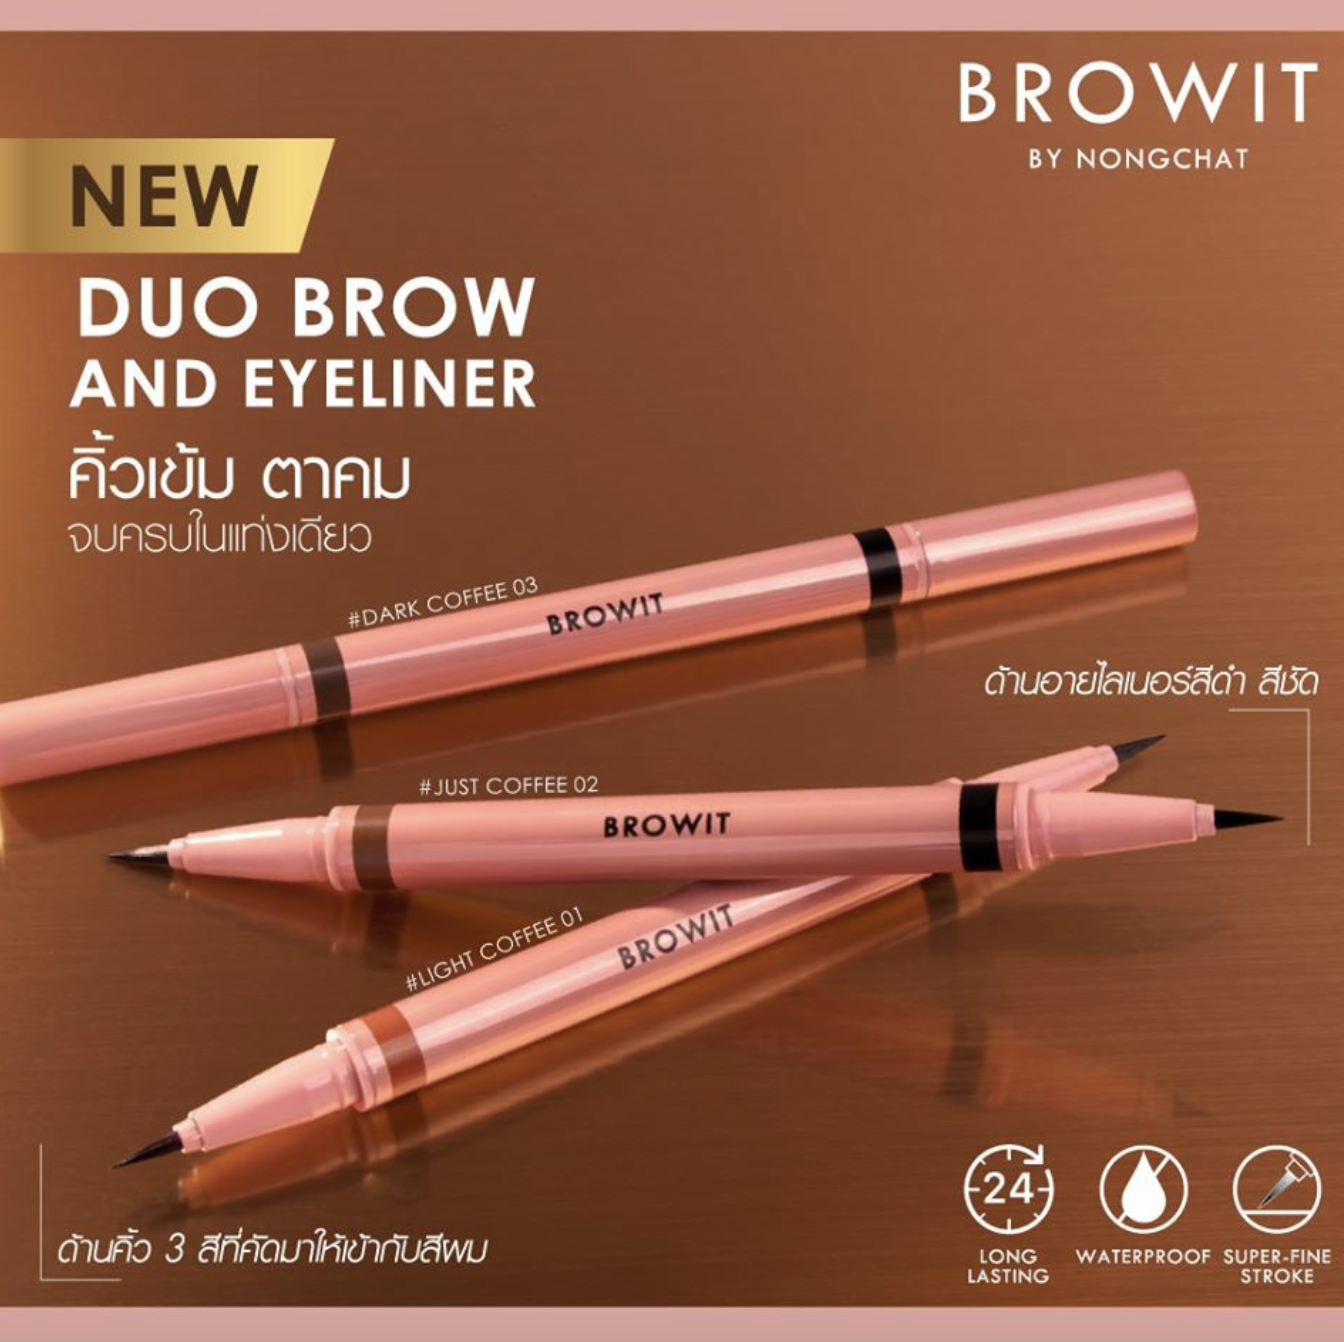 Browit Duo Brow and Eyeliner